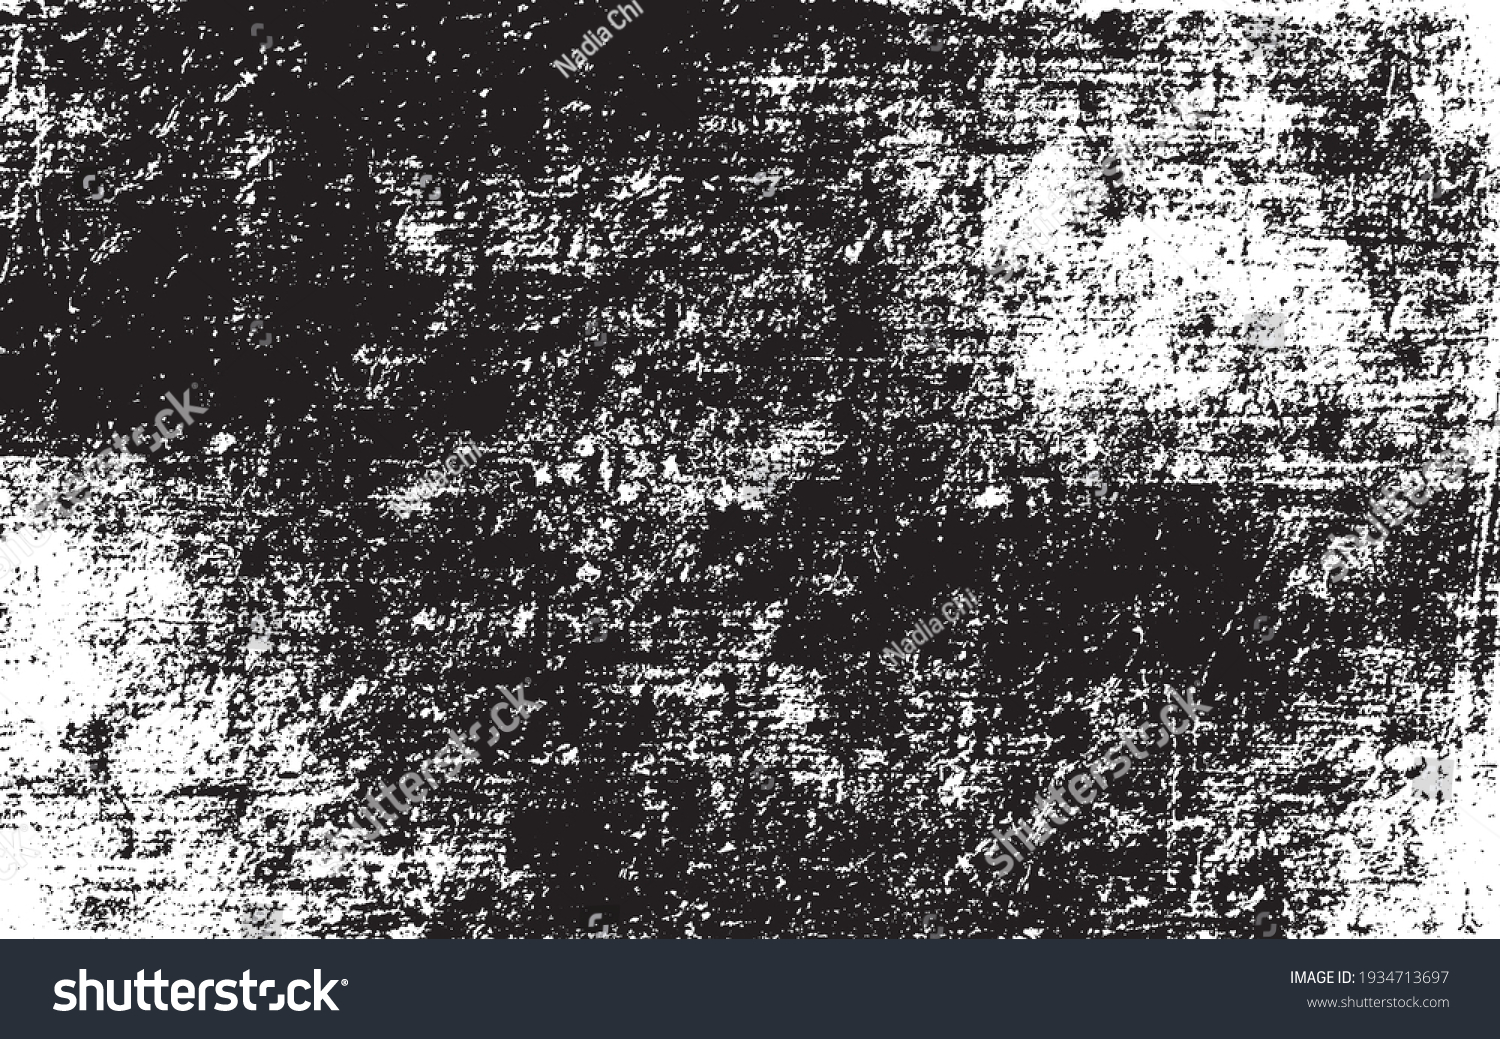 Scratched Grunge Urban Background Texture Vector. Dust Overlay Distress Grainy Grungy Effect. Distressed Backdrop Vector Illustration. Isolated Black on White Background. EPS 10. #1934713697